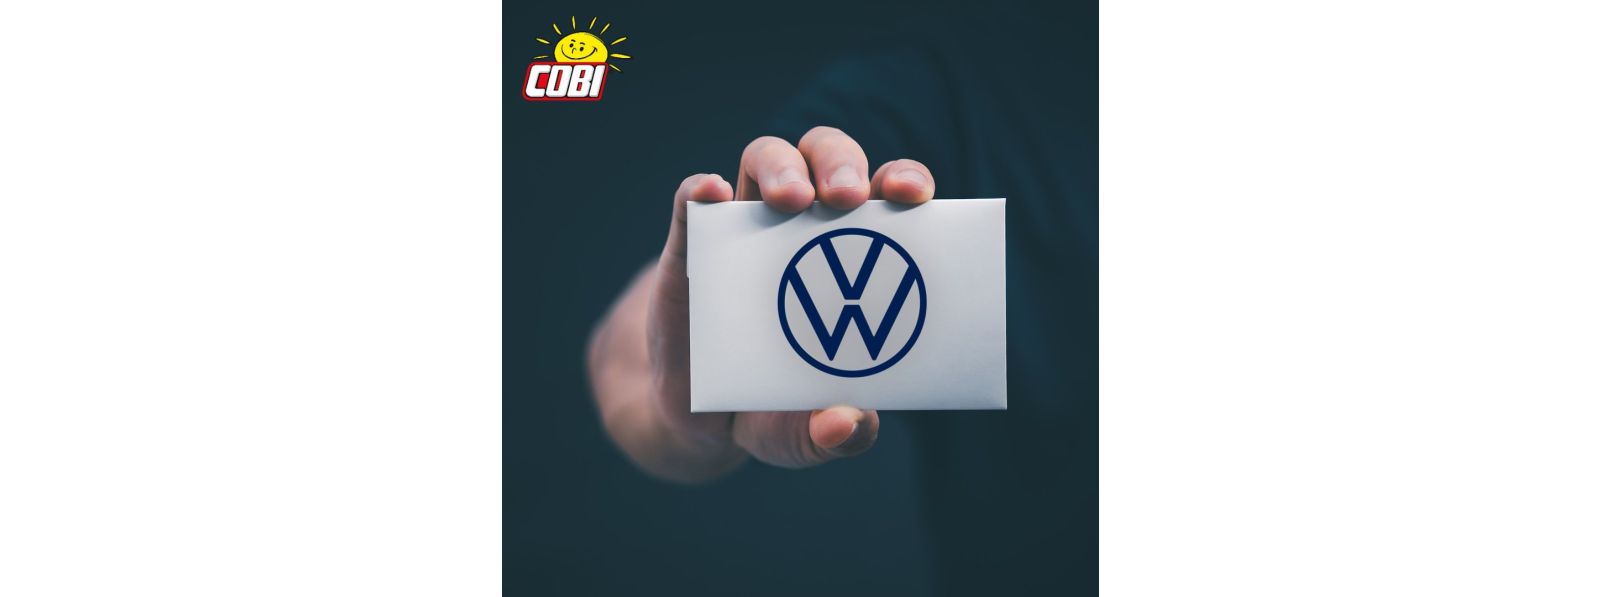 COBI signs license agreement with Volkswagen: New brick car models soon on the market!